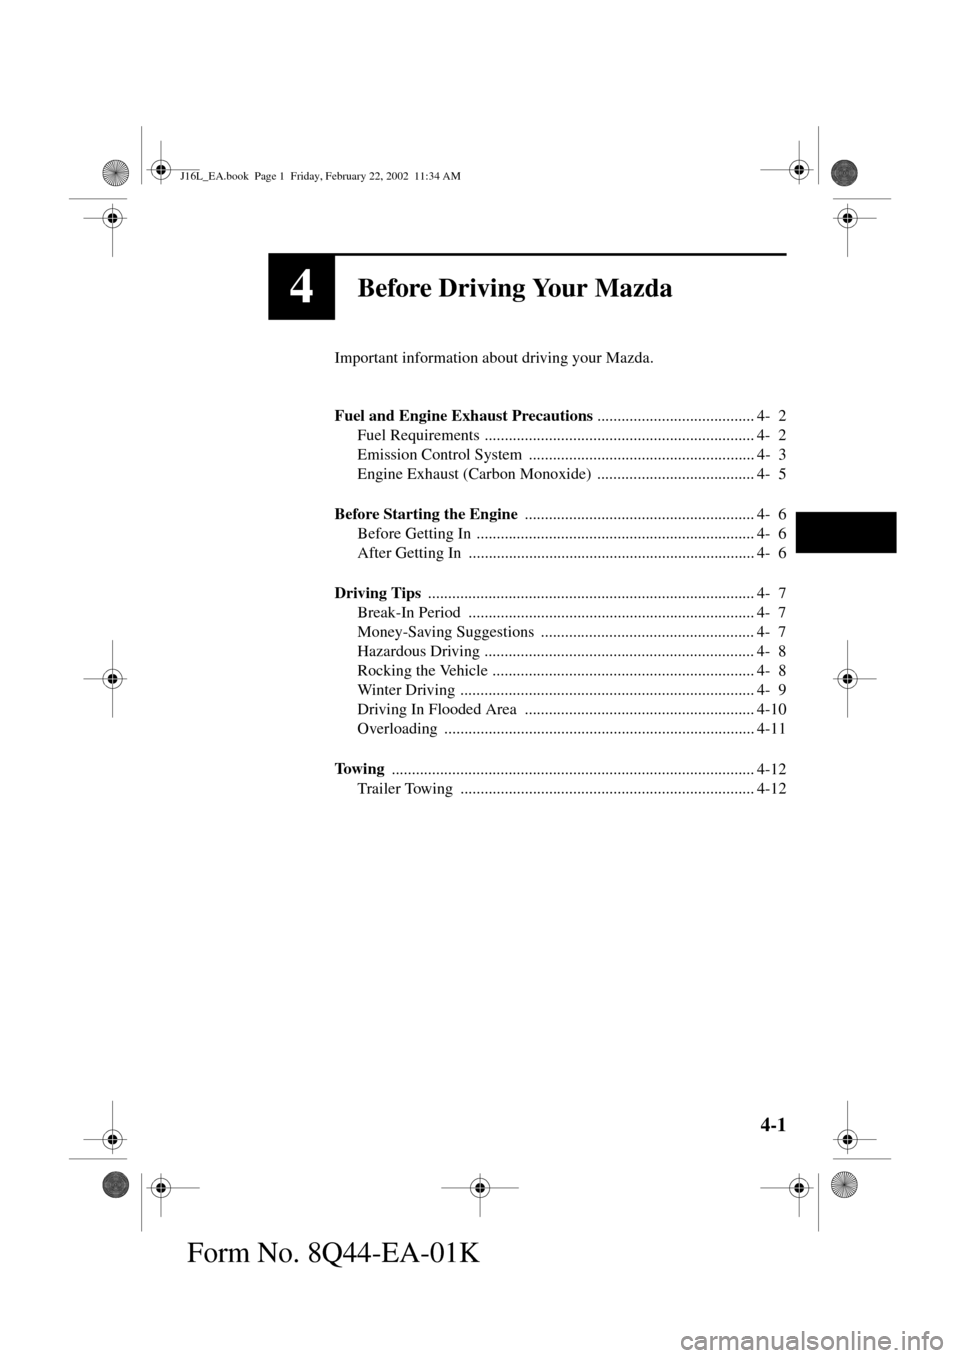 MAZDA MODEL MPV 2002  Owners Manual (in English) 4-1
Form No. 8Q44-EA-01K
4Before Driving Your Mazda
Important information about driving your Mazda.
Fuel and Engine Exhaust Precautions 
....................................... 4- 2
Fuel Requirements 